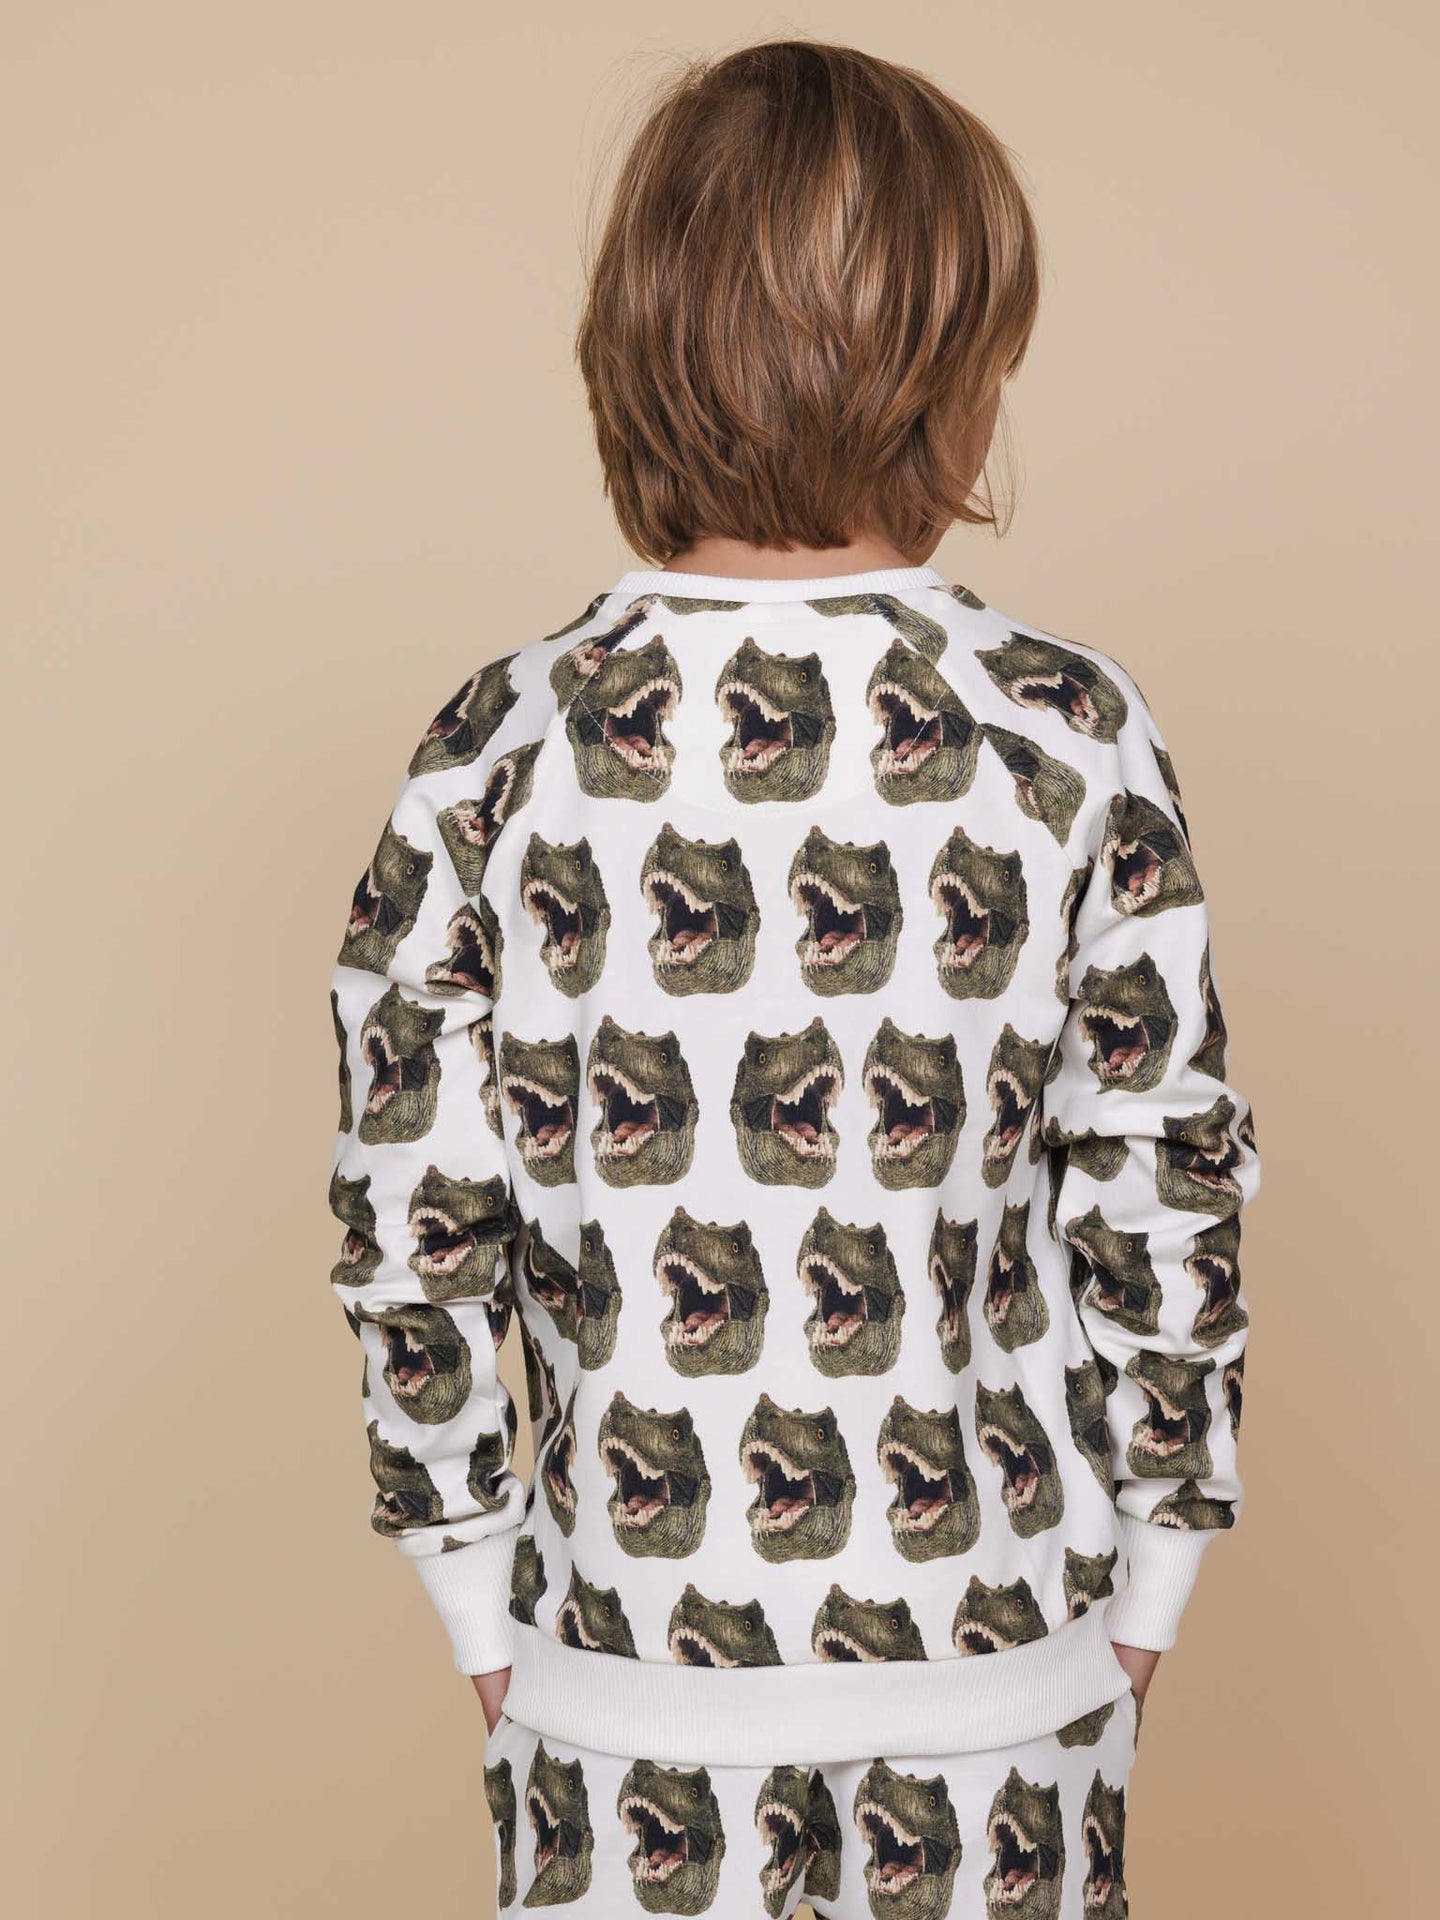 Dino sweater for kids